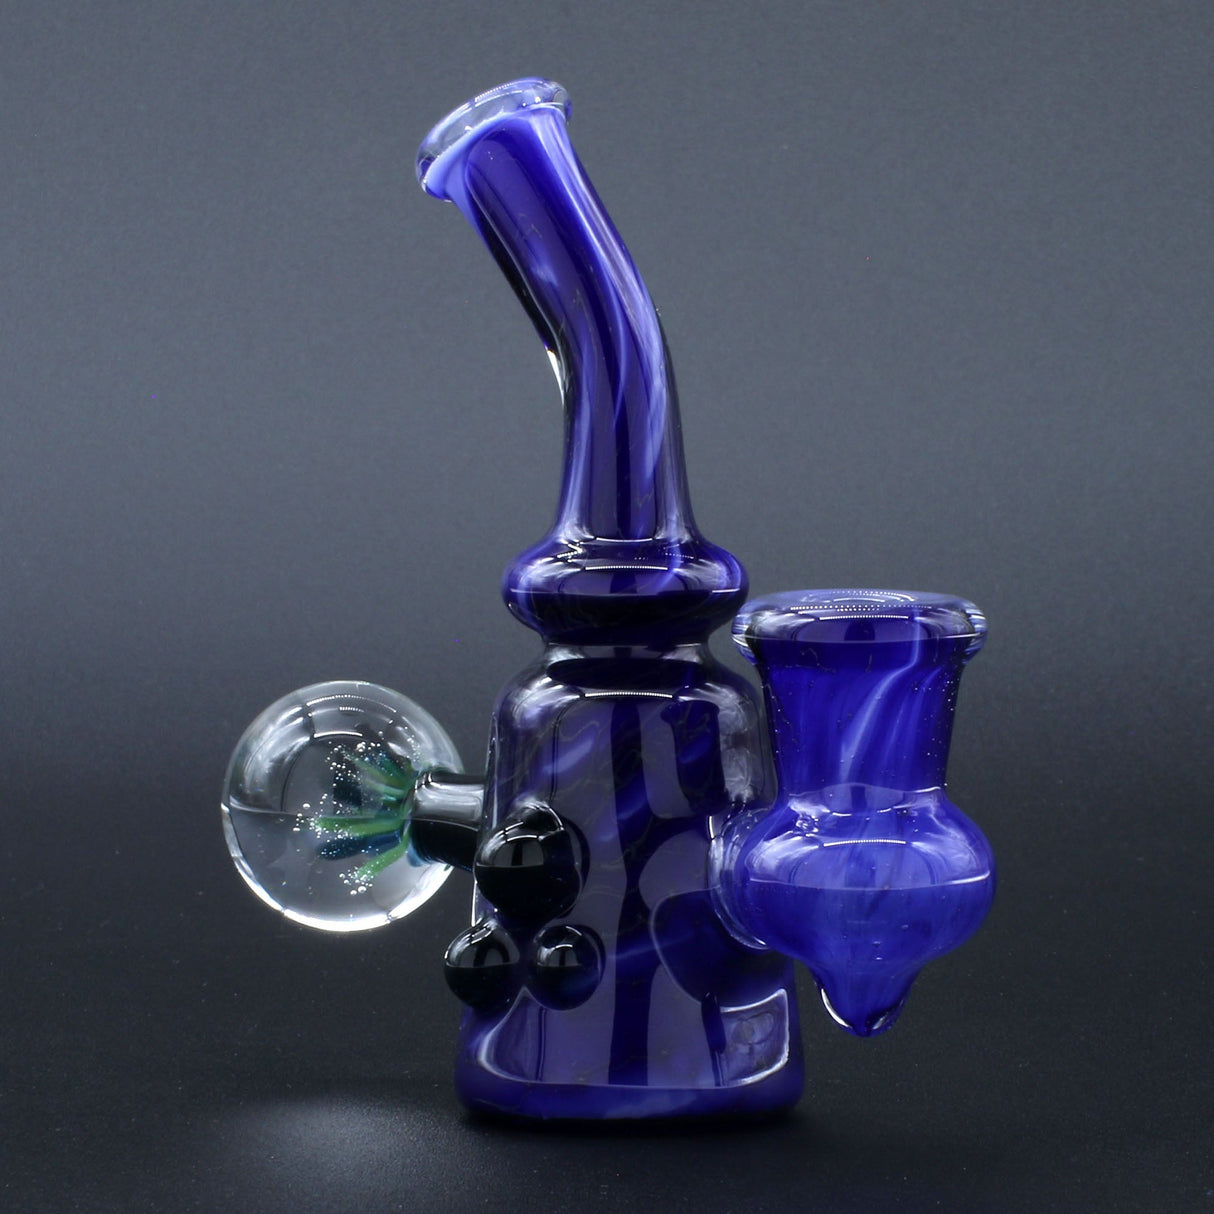 Clayball Glass "Blue Moon" Heady Sherlock Dab Rig with 14mm joint, front view on dark background